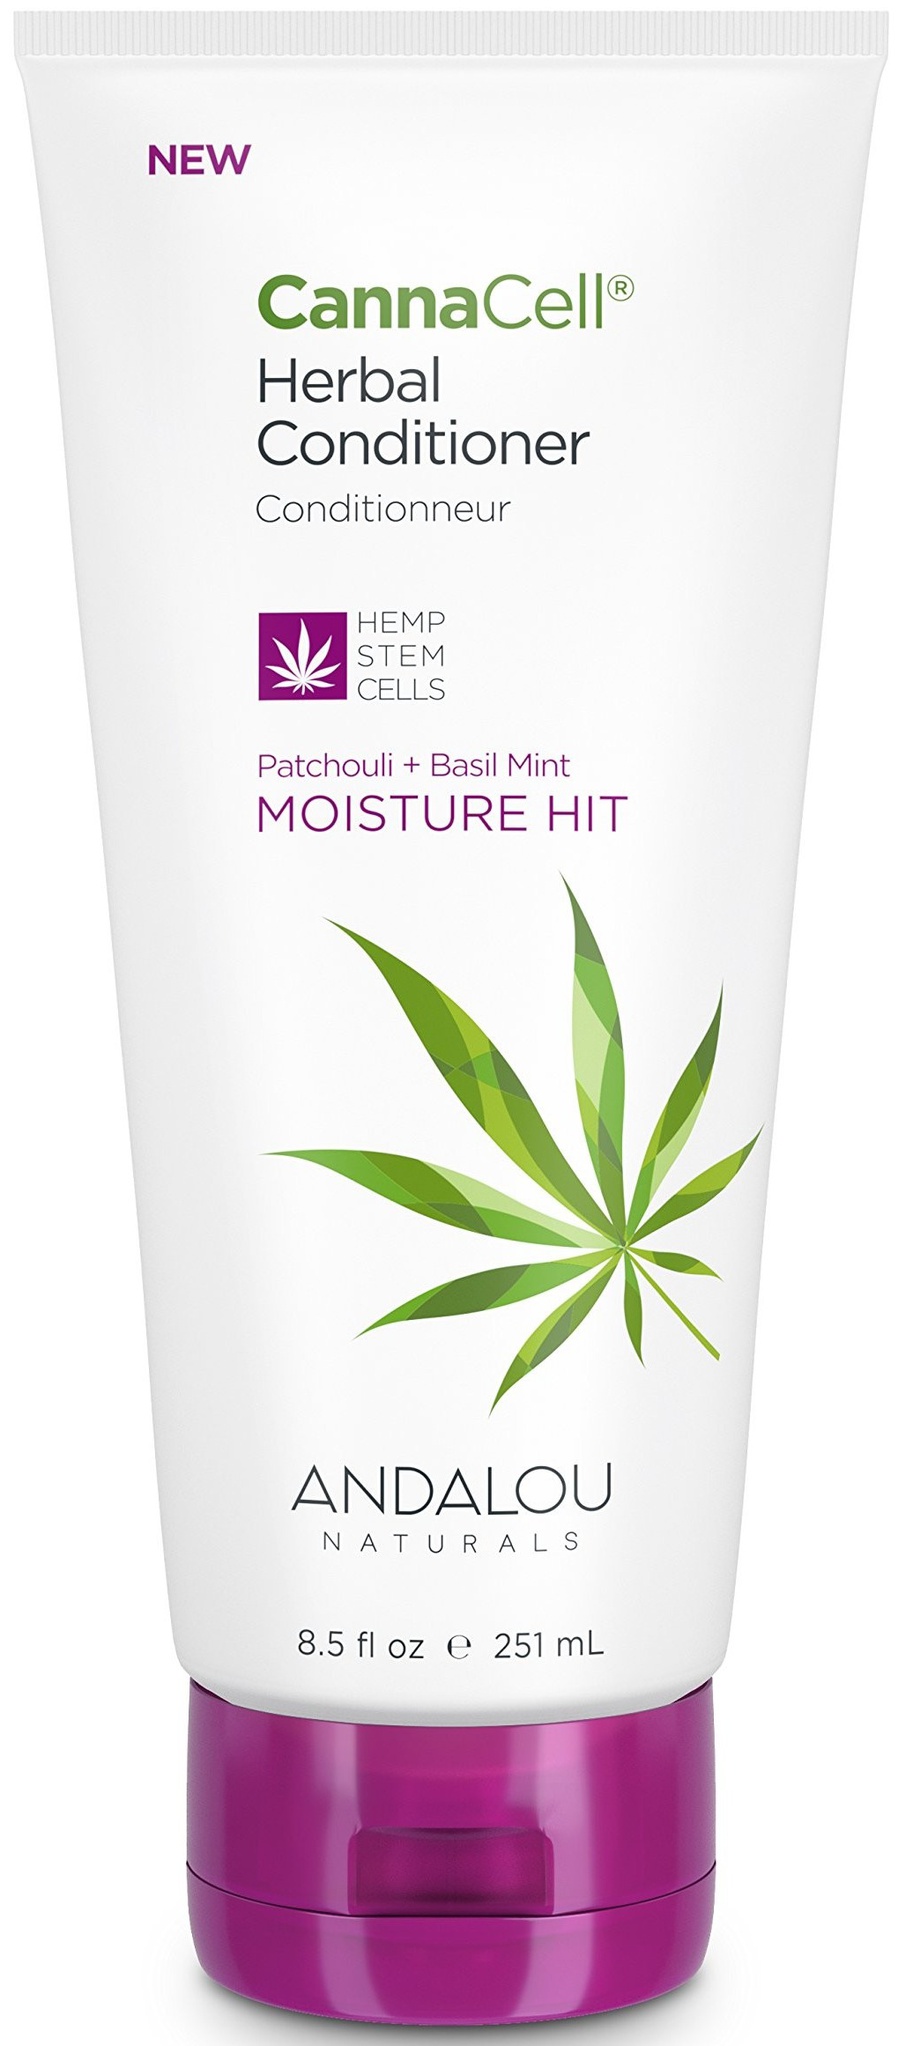 Andalou Naturals Cannacell Herbal Conditioner Moisture Hit